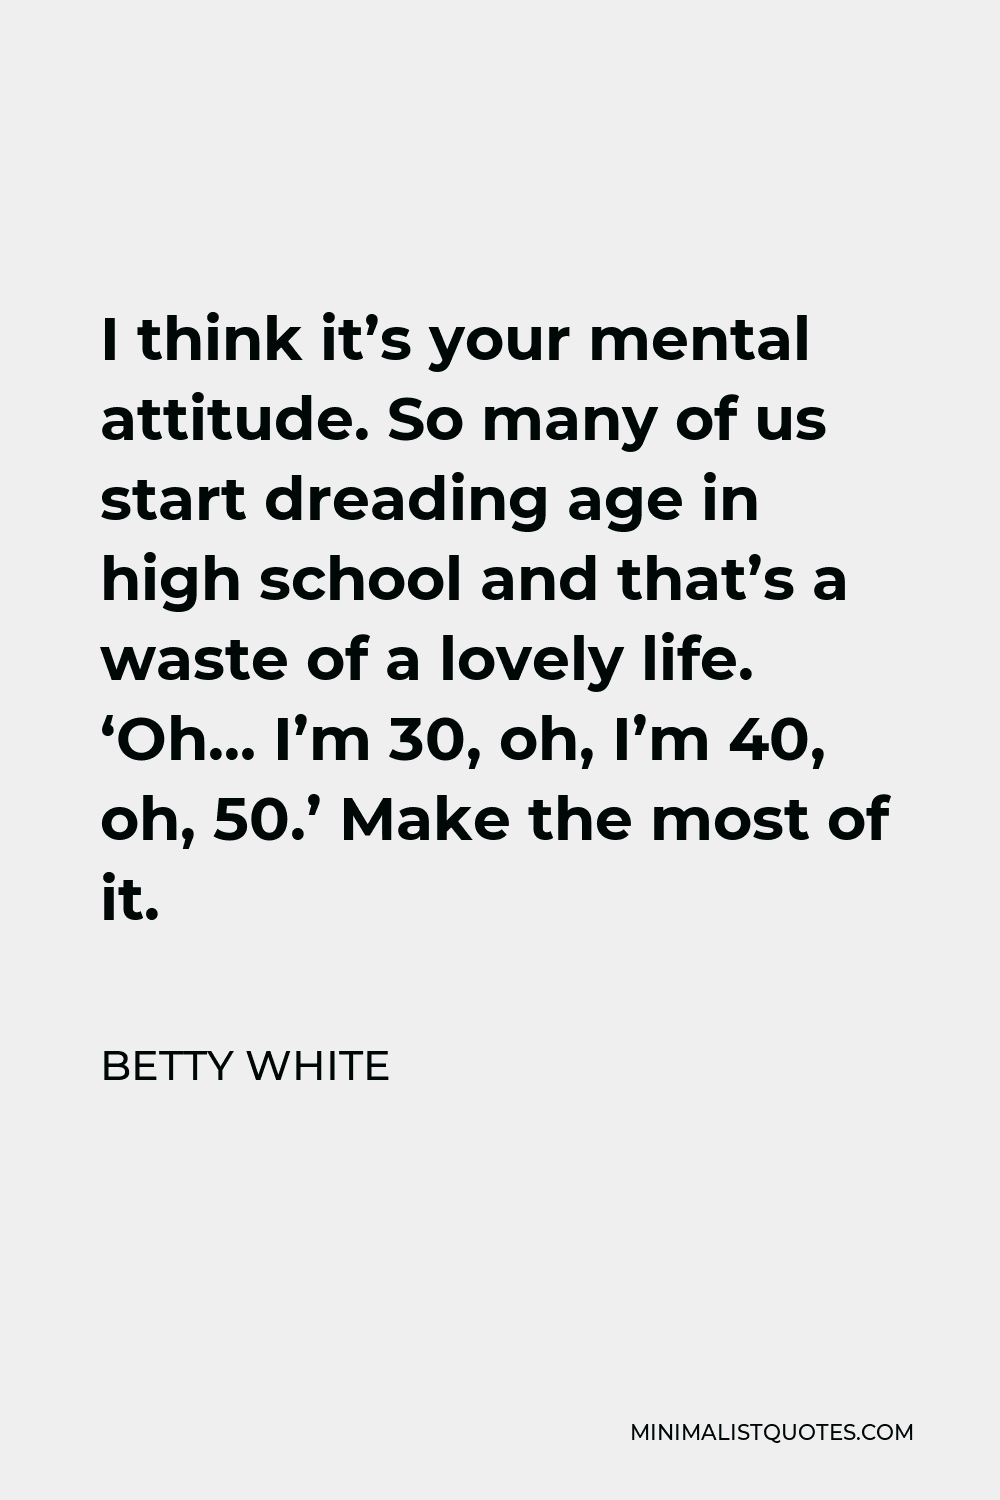 Betty White Quote - I think it’s your mental attitude. So many of us start dreading age in high school and that’s a waste of a lovely life. ‘Oh… I’m 30, oh, I’m 40, oh, 50.’ Make the most of it.